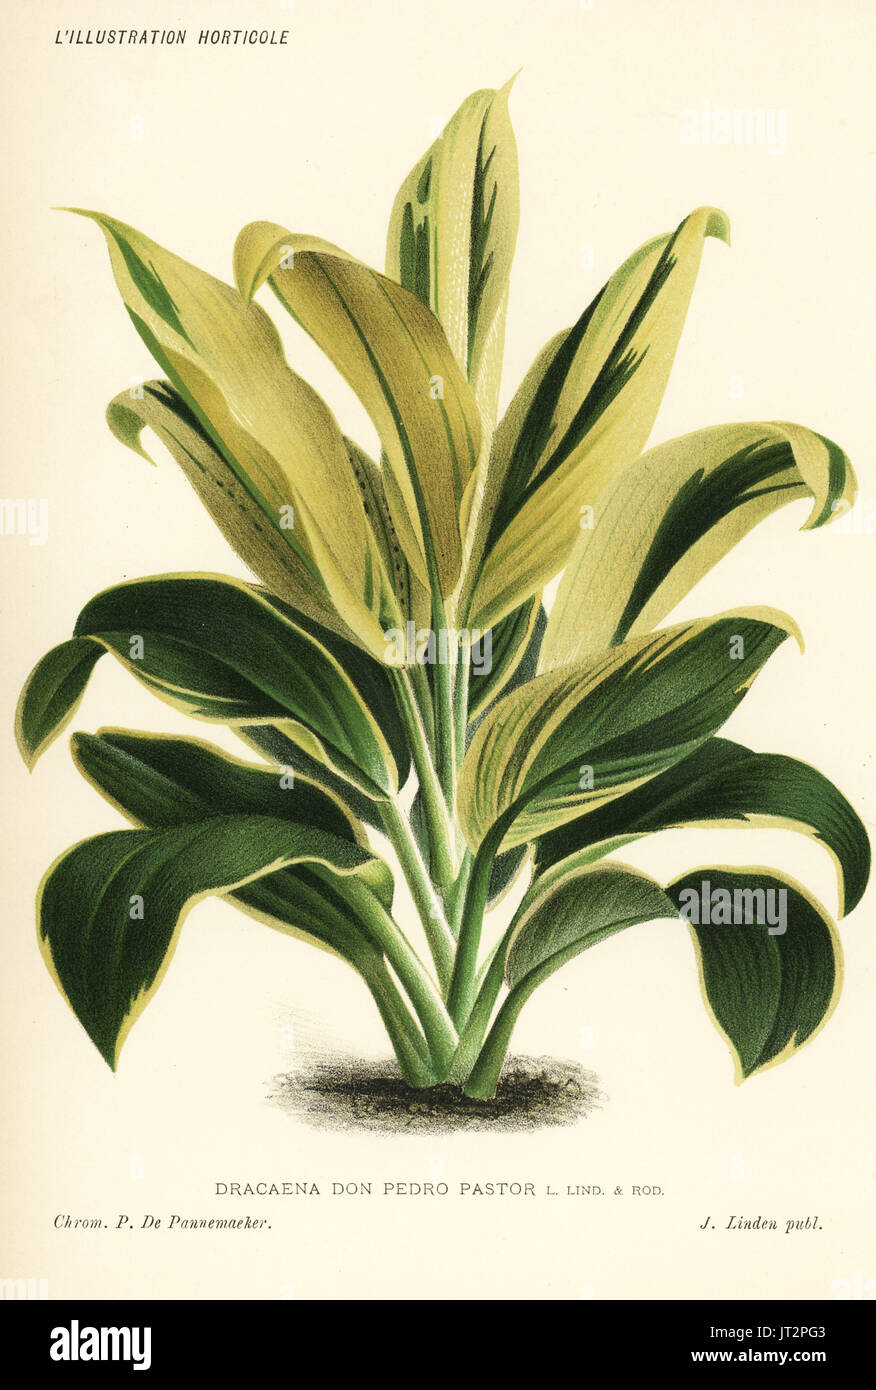 Cordyline hybrid, cross of Cordyline stricta and Cordyline fruticosa (Dracaena Don Pedro Pastor y Landero, named for the Madrid gardener). Chromolithograph by Pieter de Pannemaeker from Jean Linden's l'Illustration Horticole, Brussels, 1885. Stock Photo